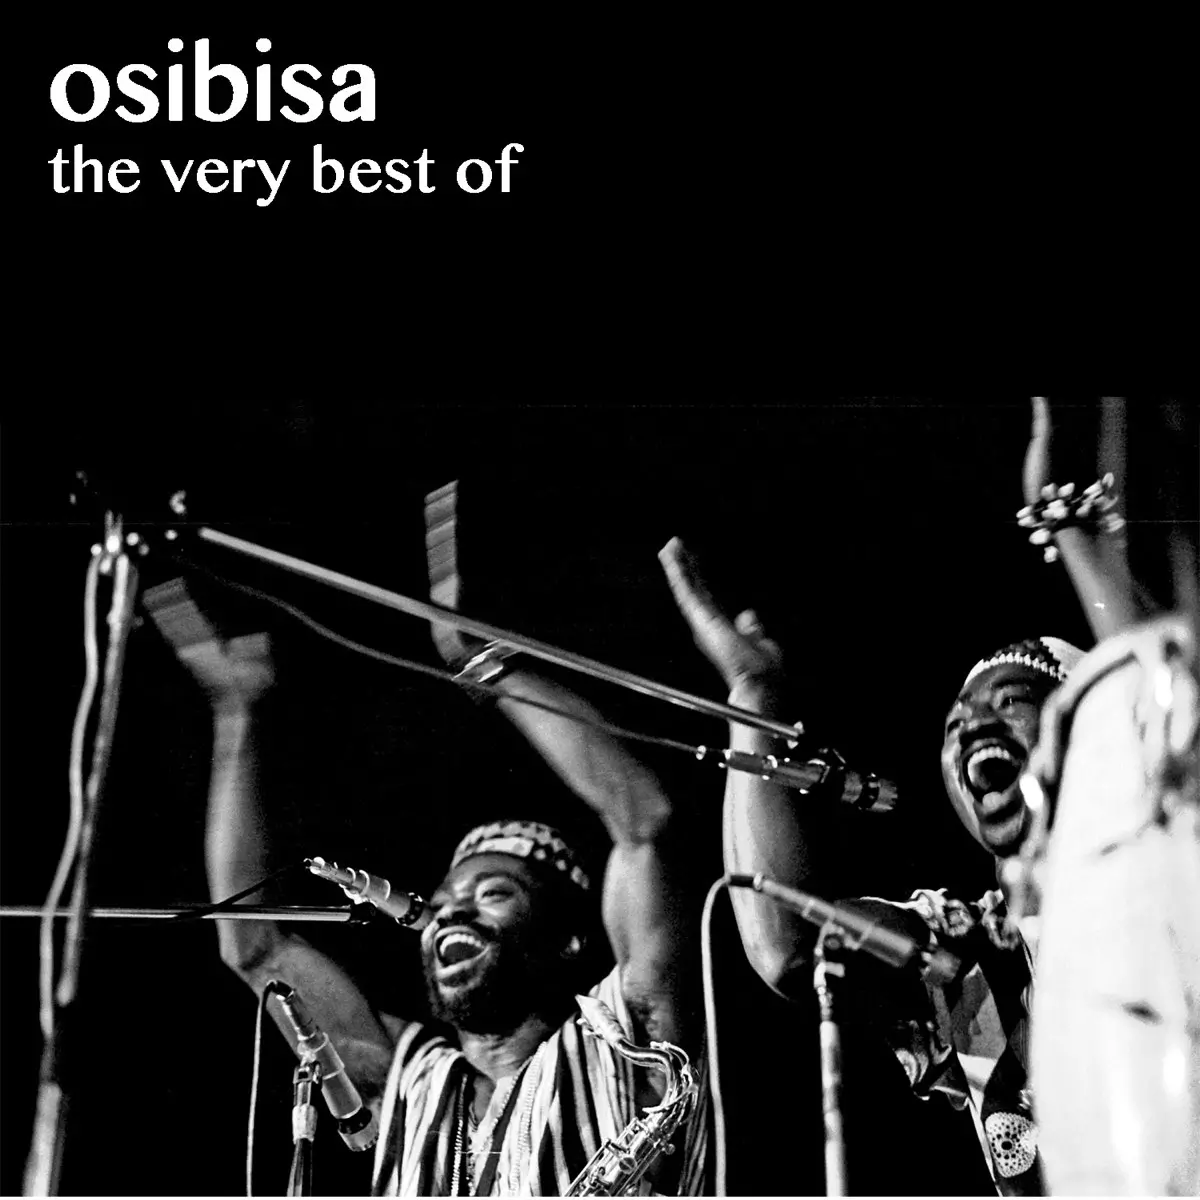 The Very Best Of by Osibisa on Apple Music